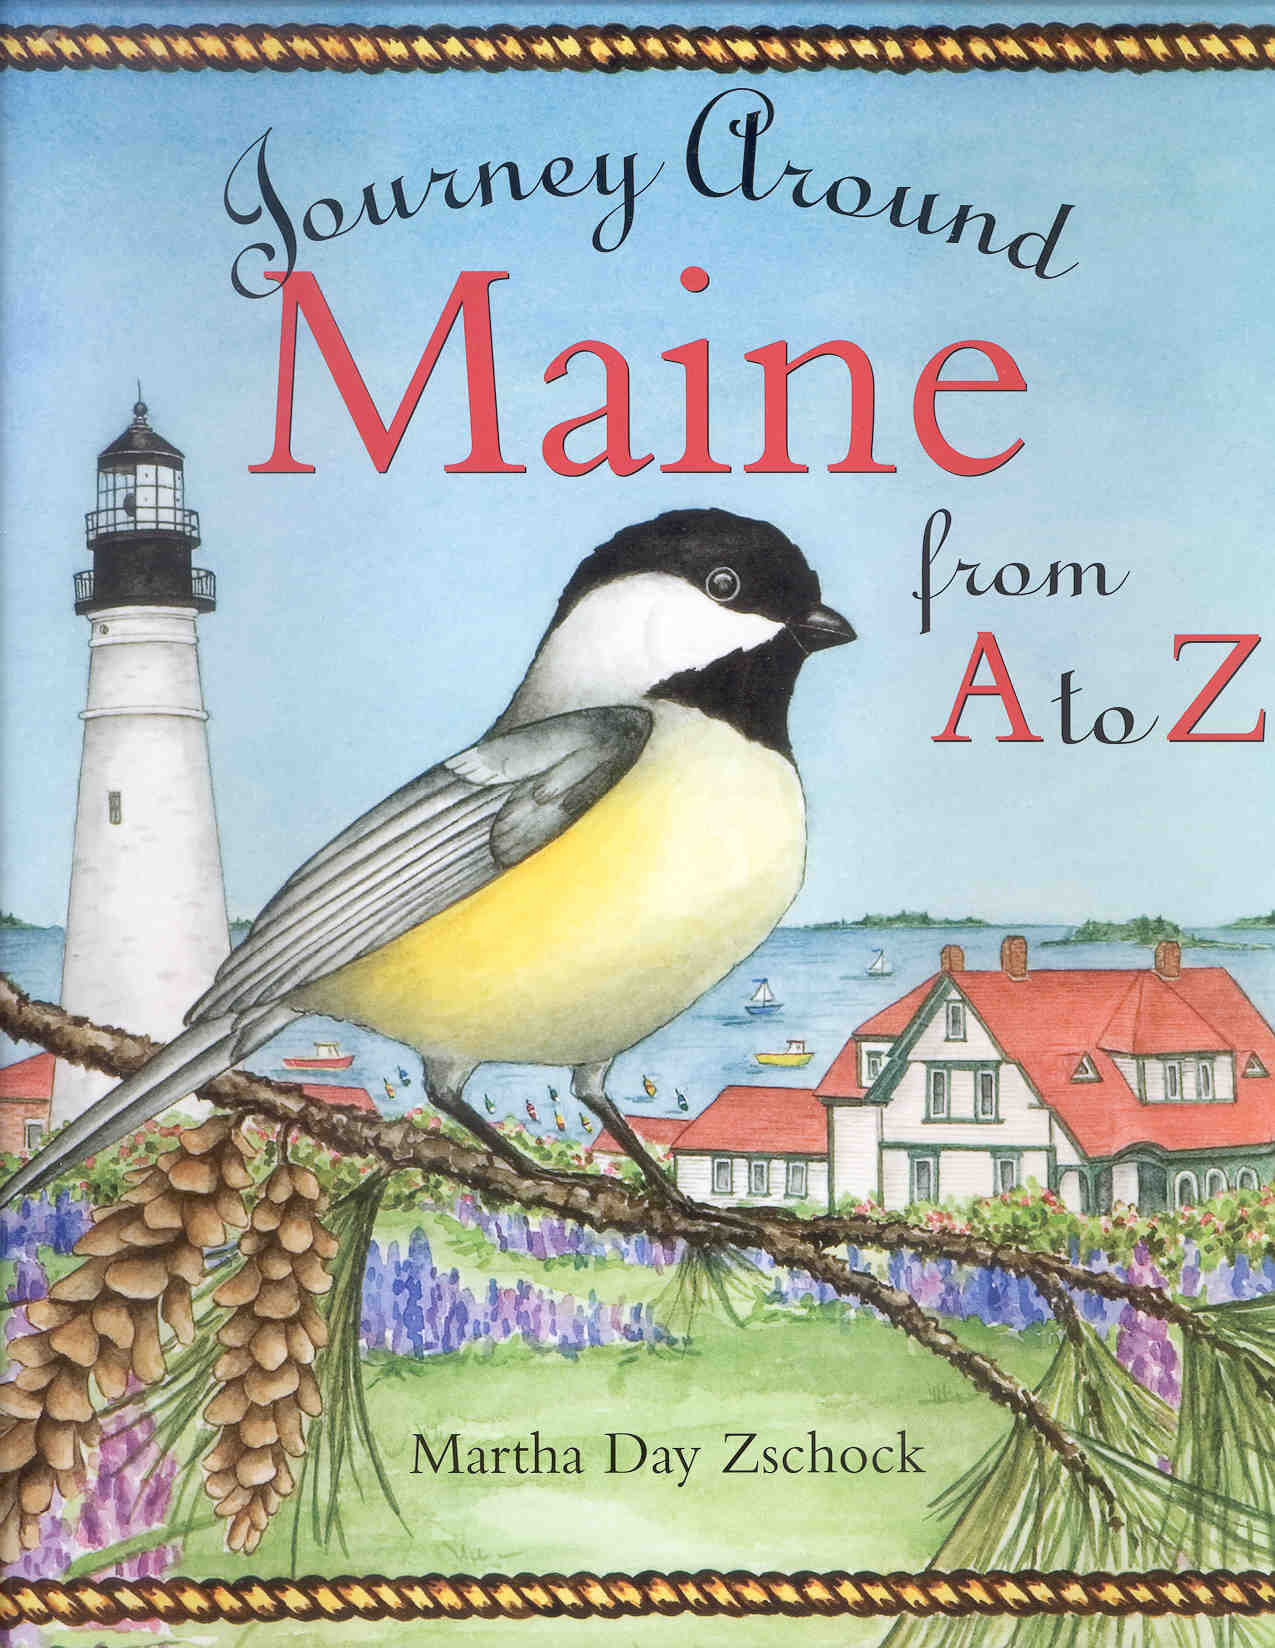 Image of the book cover Journey Around Maine